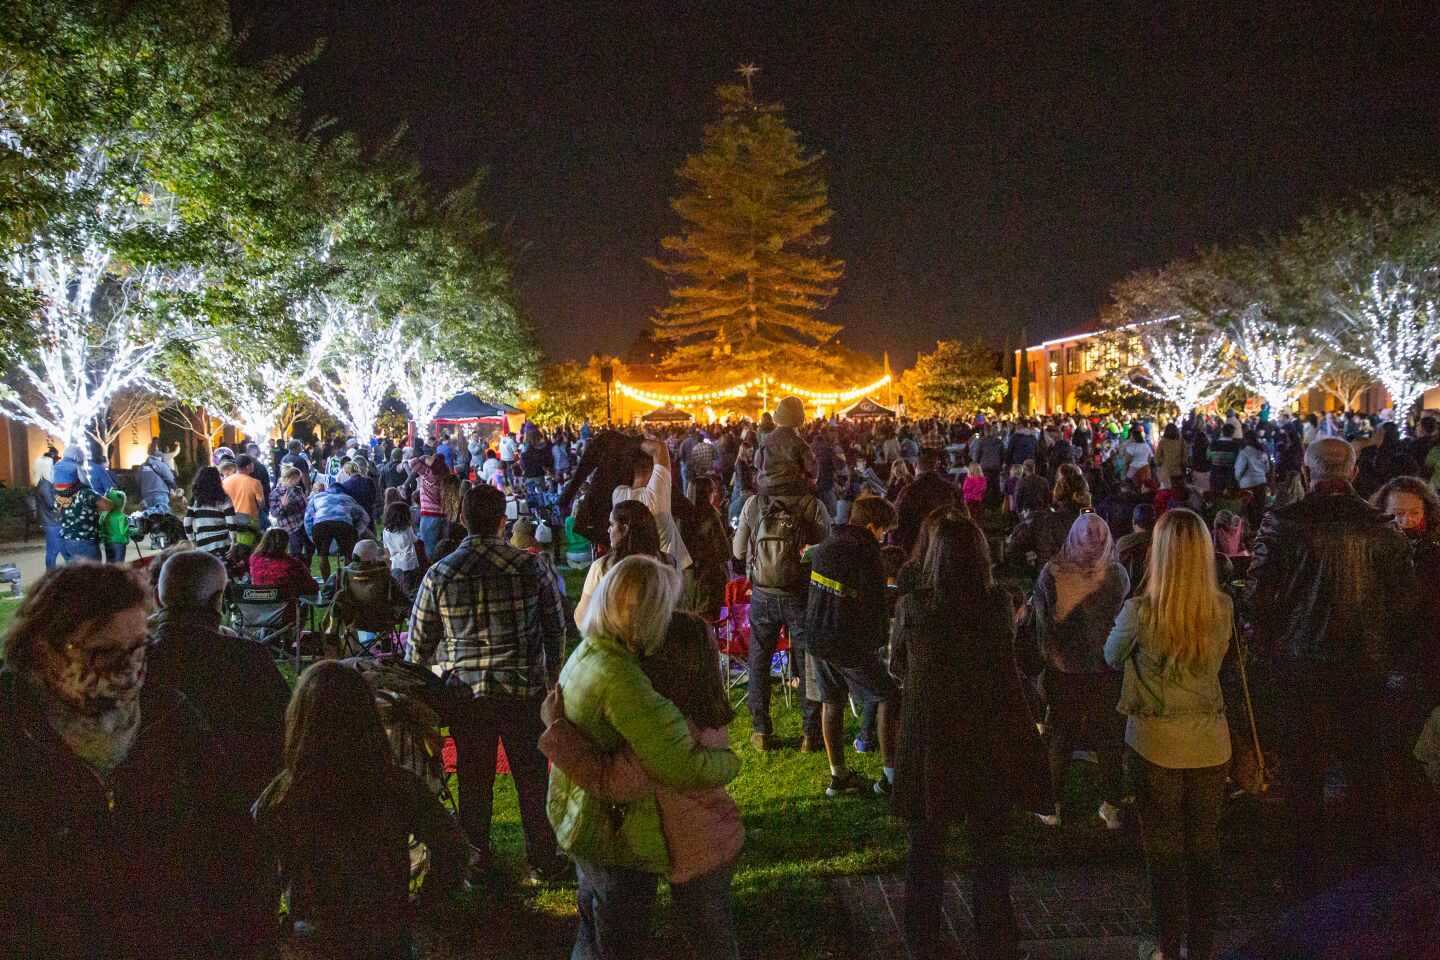 The crowd waits for the lighting of Liberty Station's 88-foot Norfolk pine tree for the holidays.